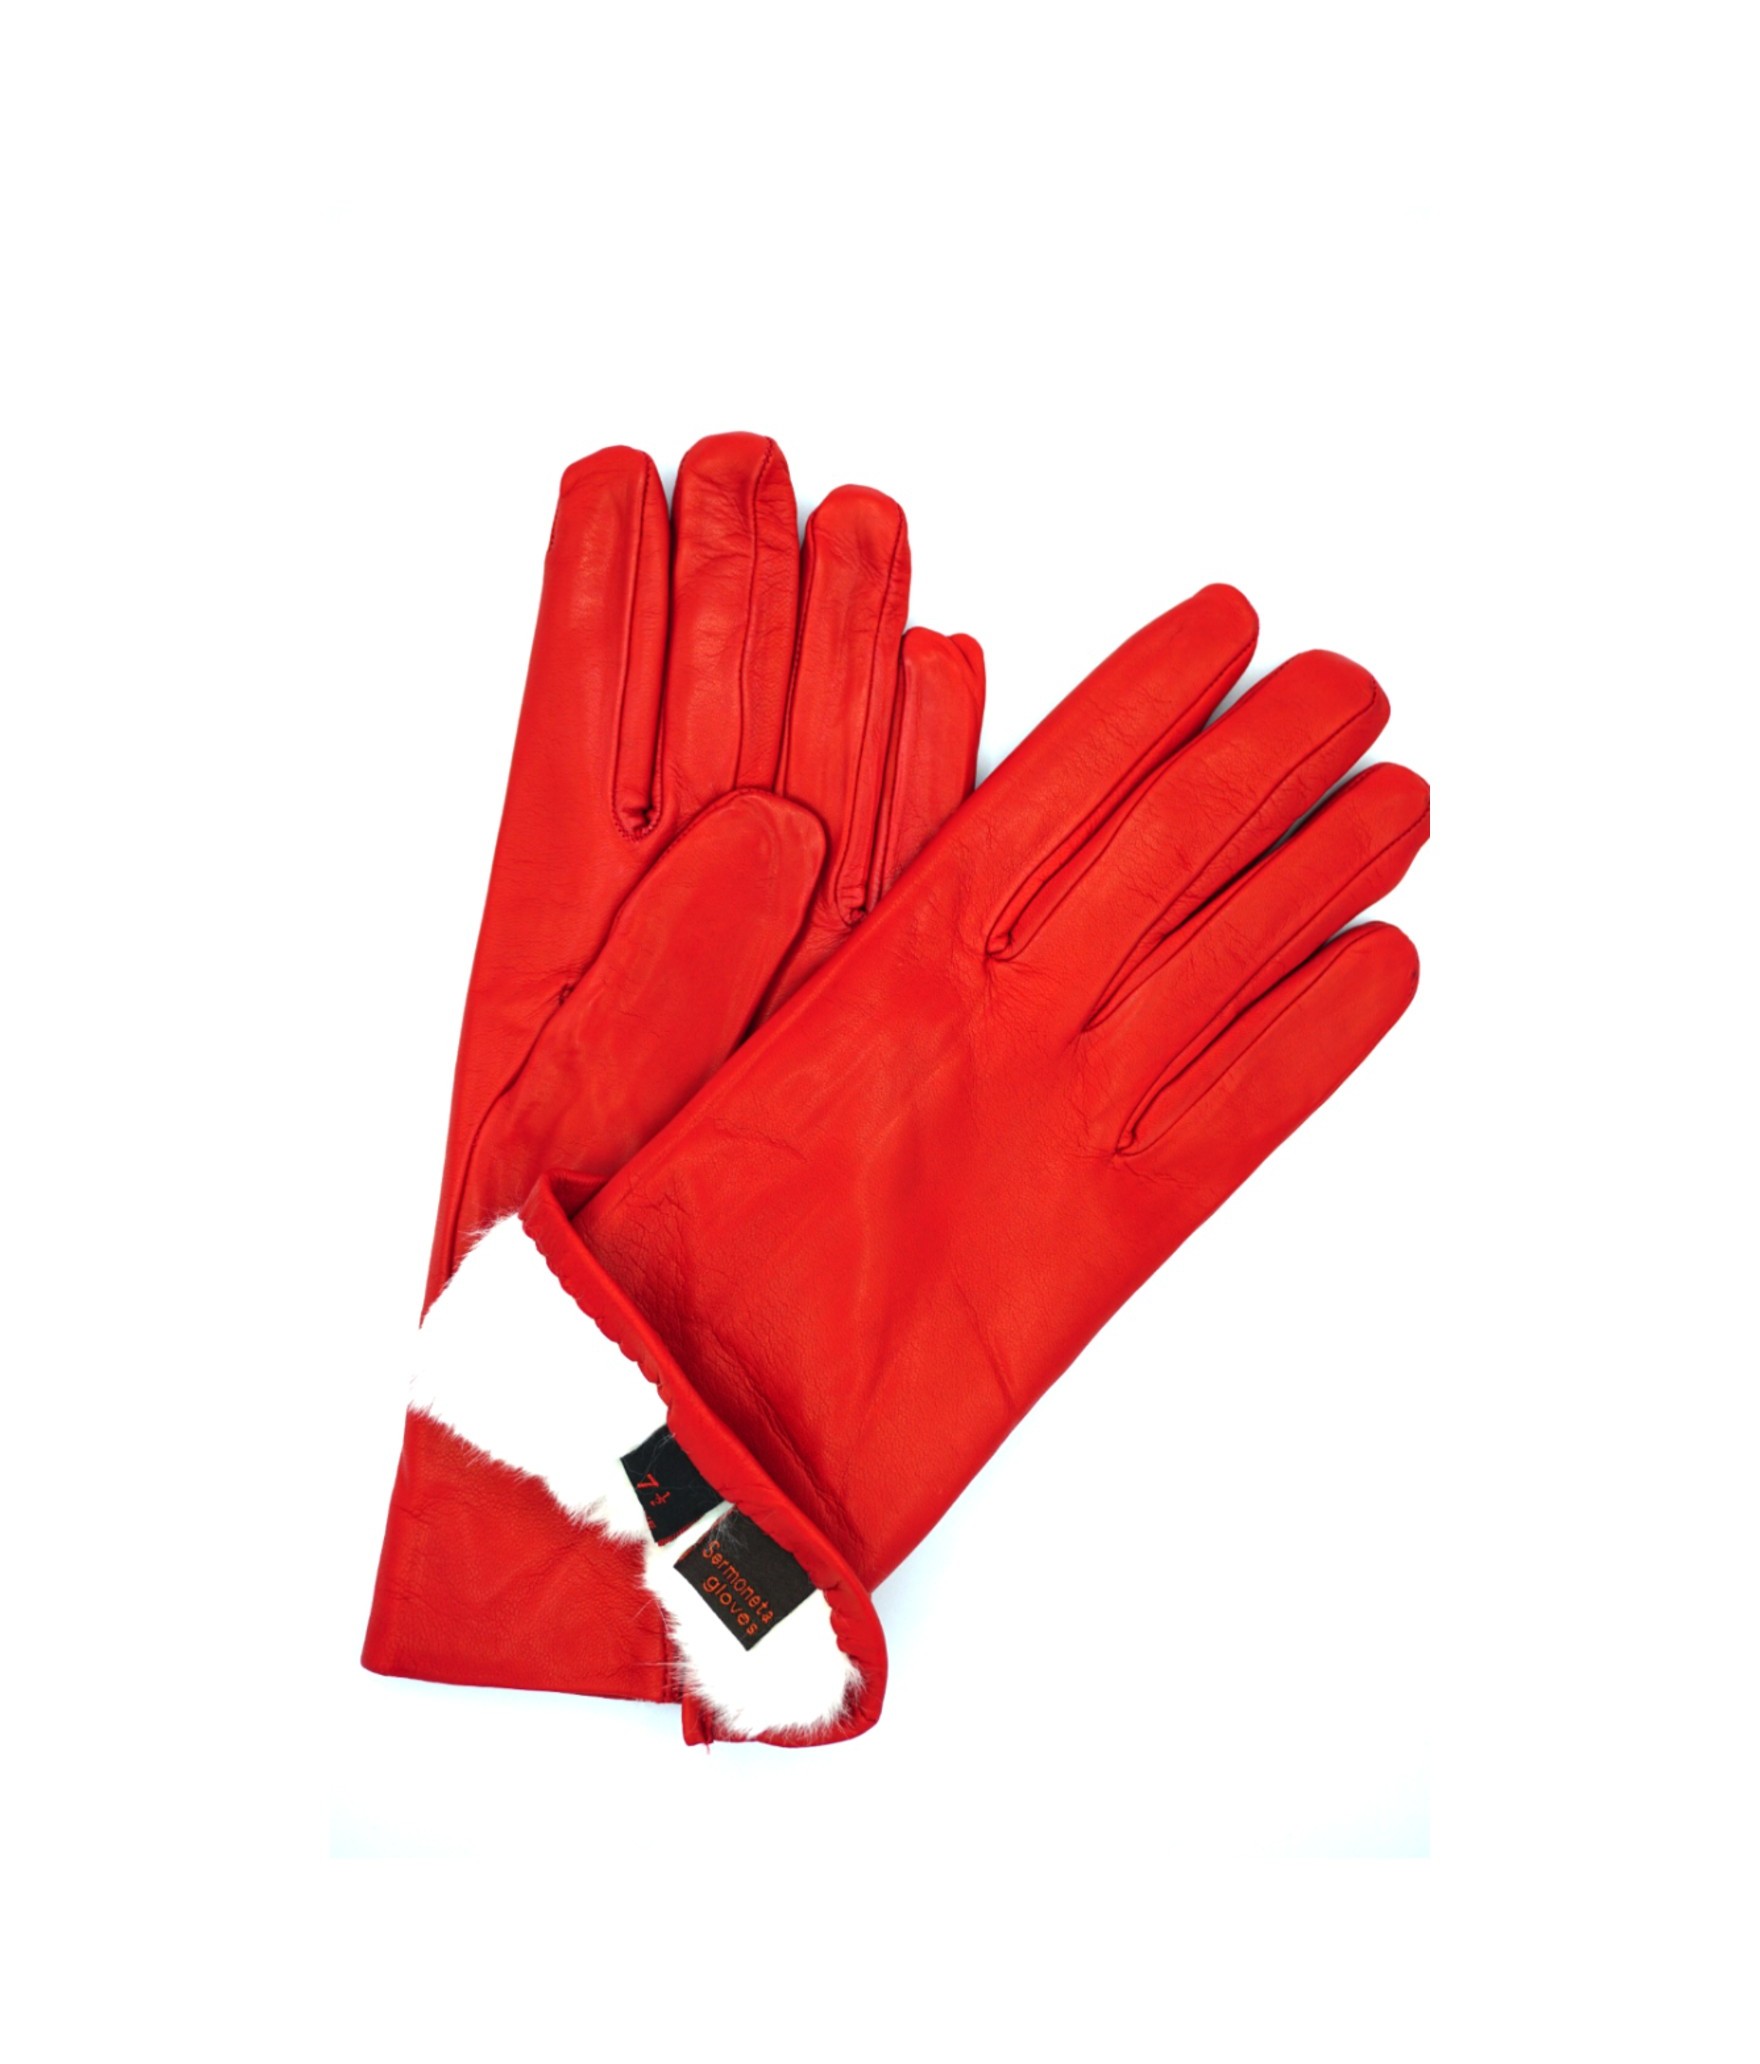 1022 Classic Leather Gloves Lined White Rabbit Dark Red 